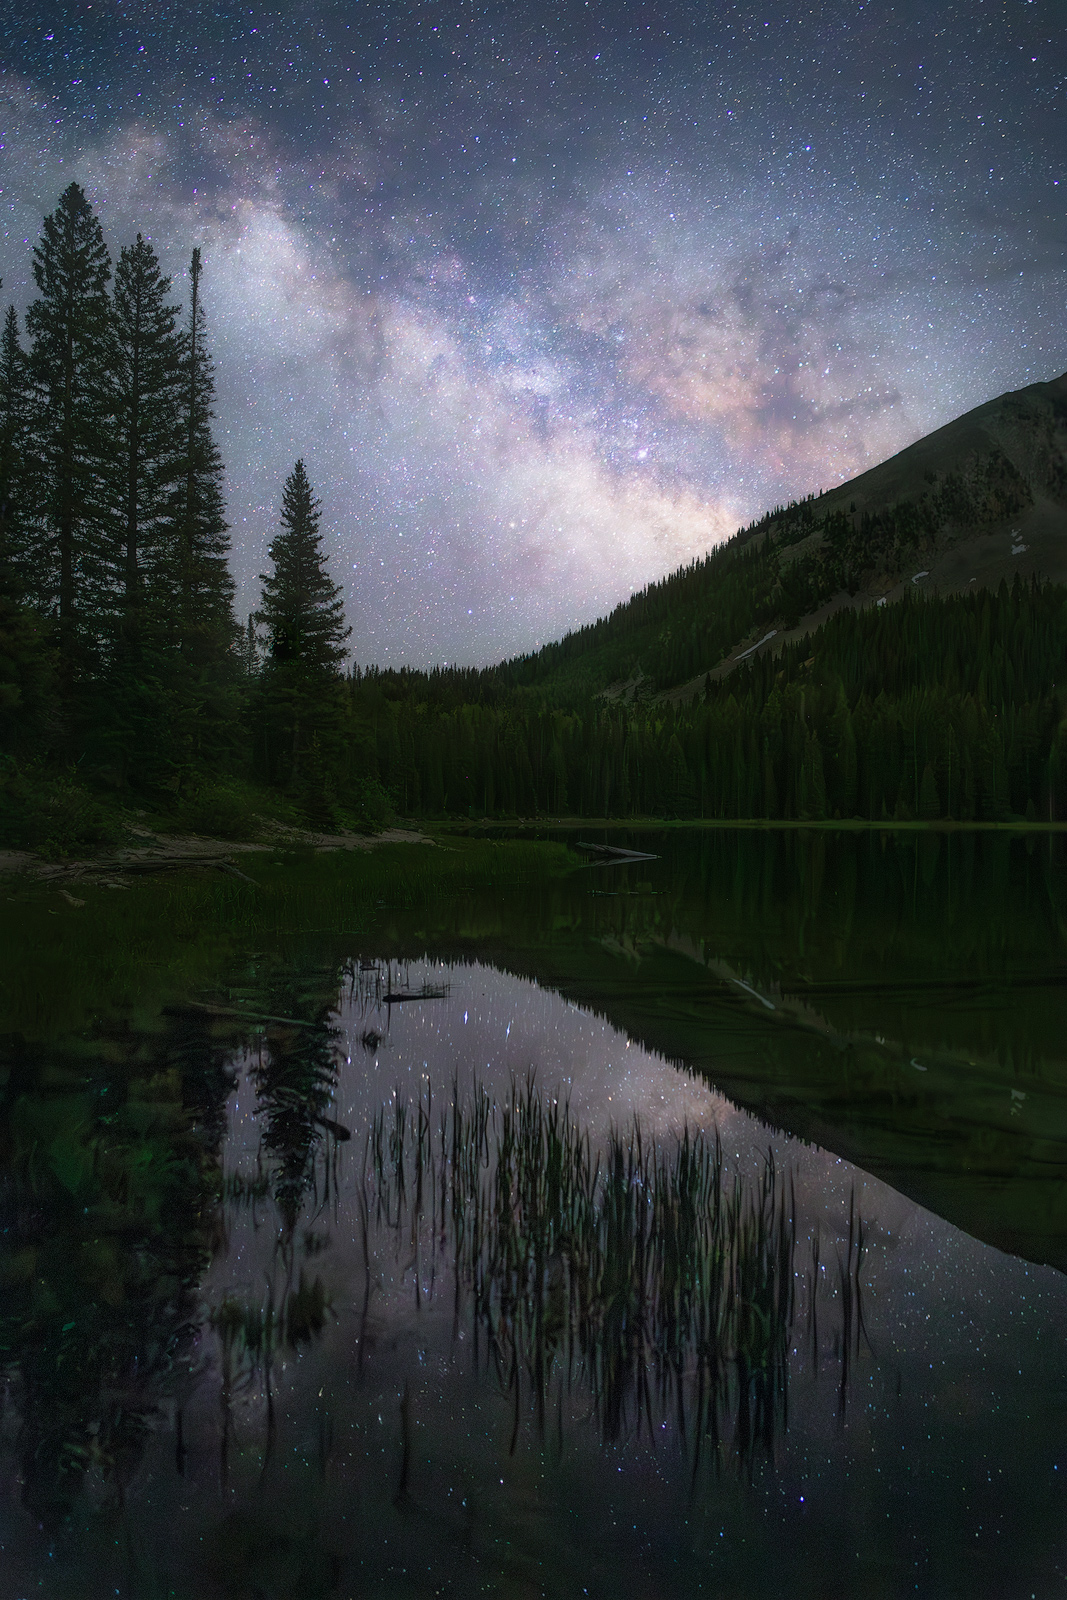 The core of the Milky Way rises above a still pond.